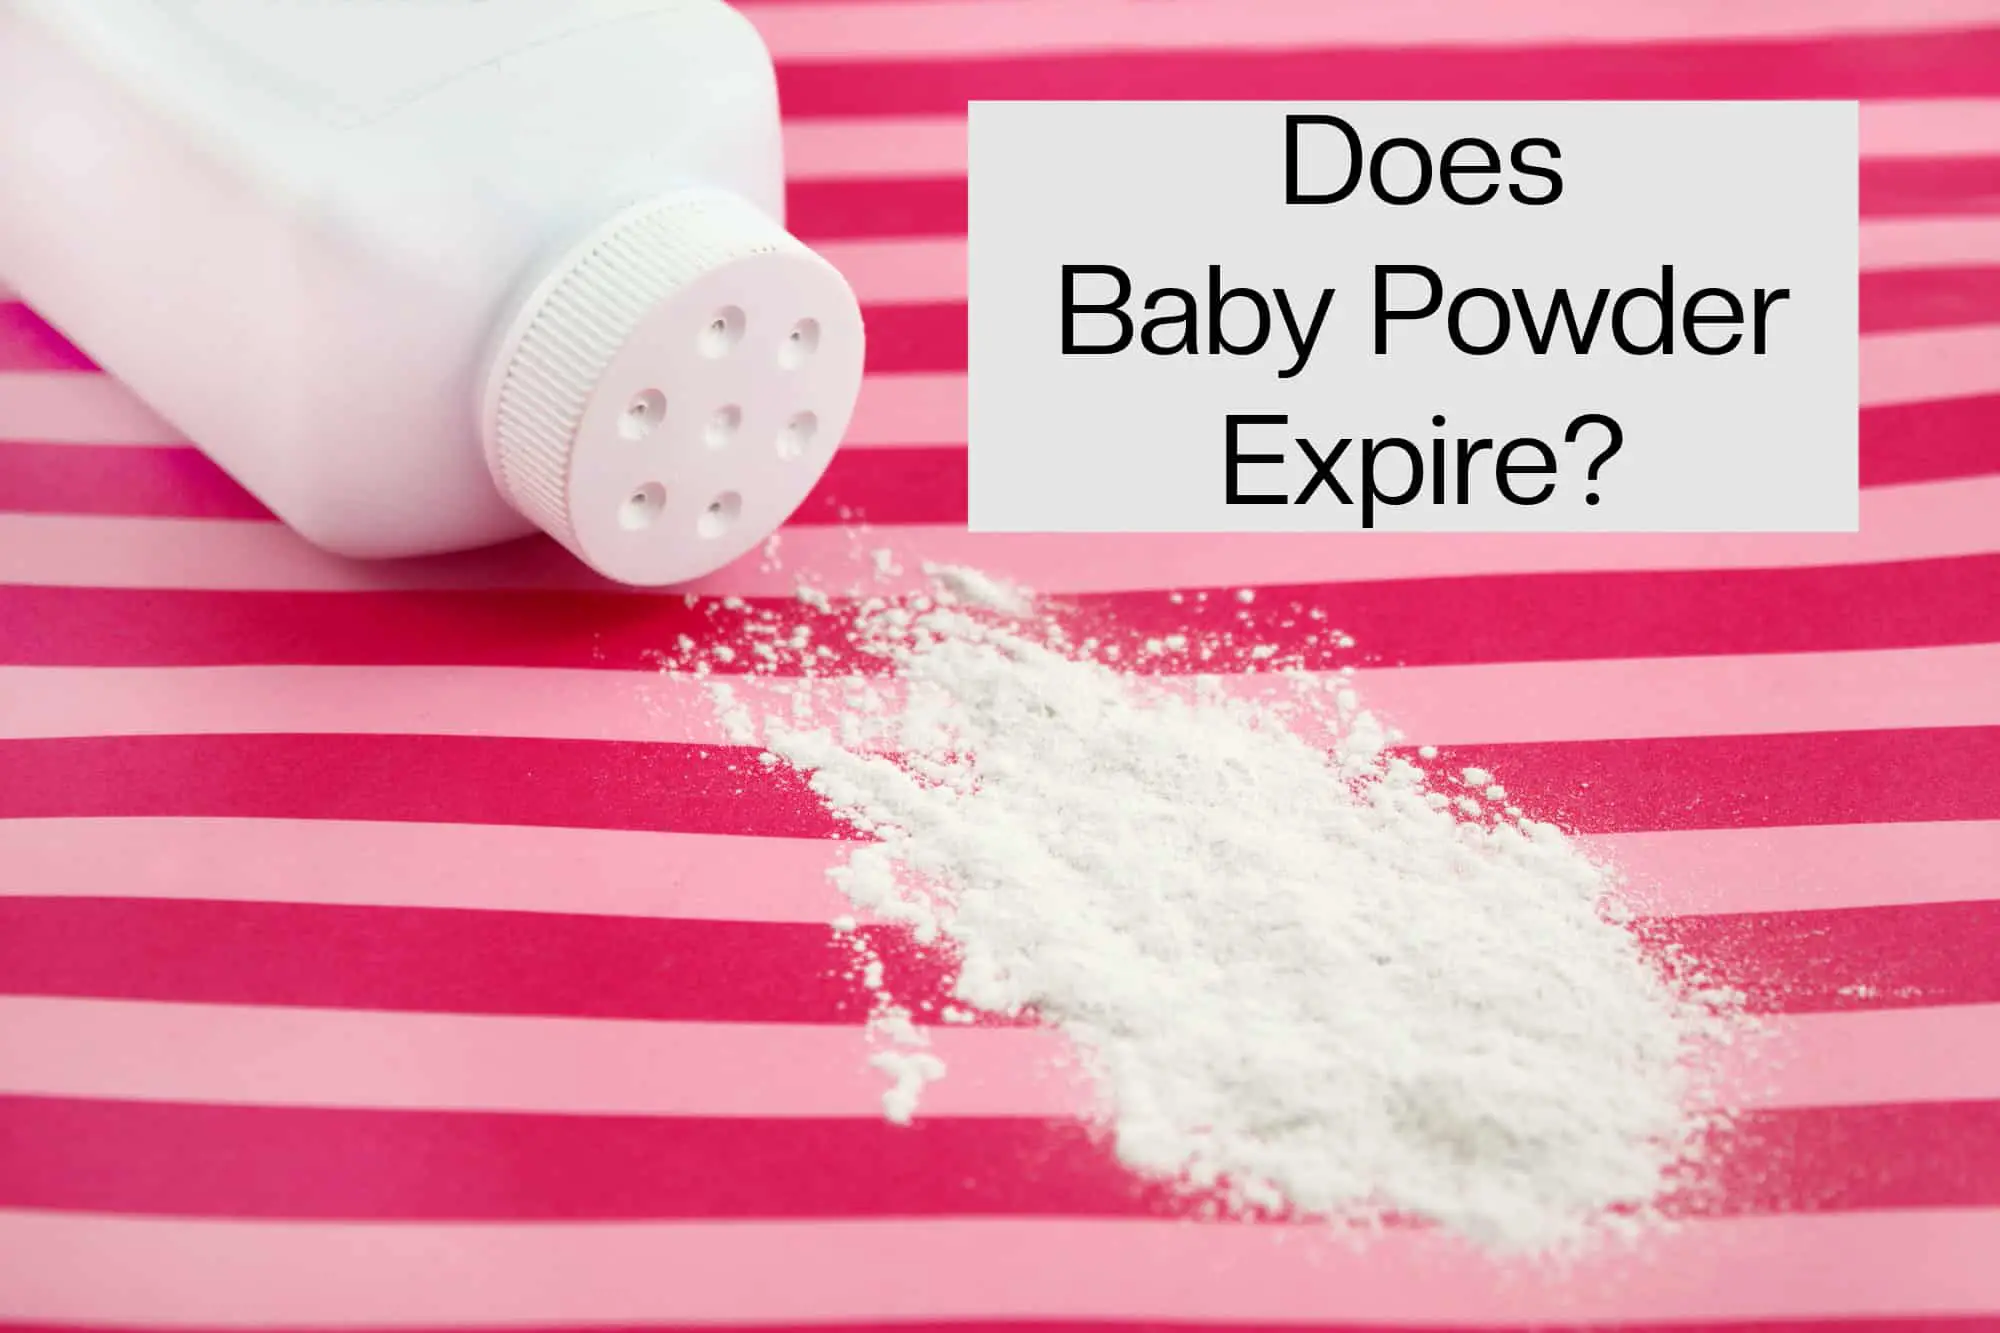 Baby powder spilled. Does baby powder expire?